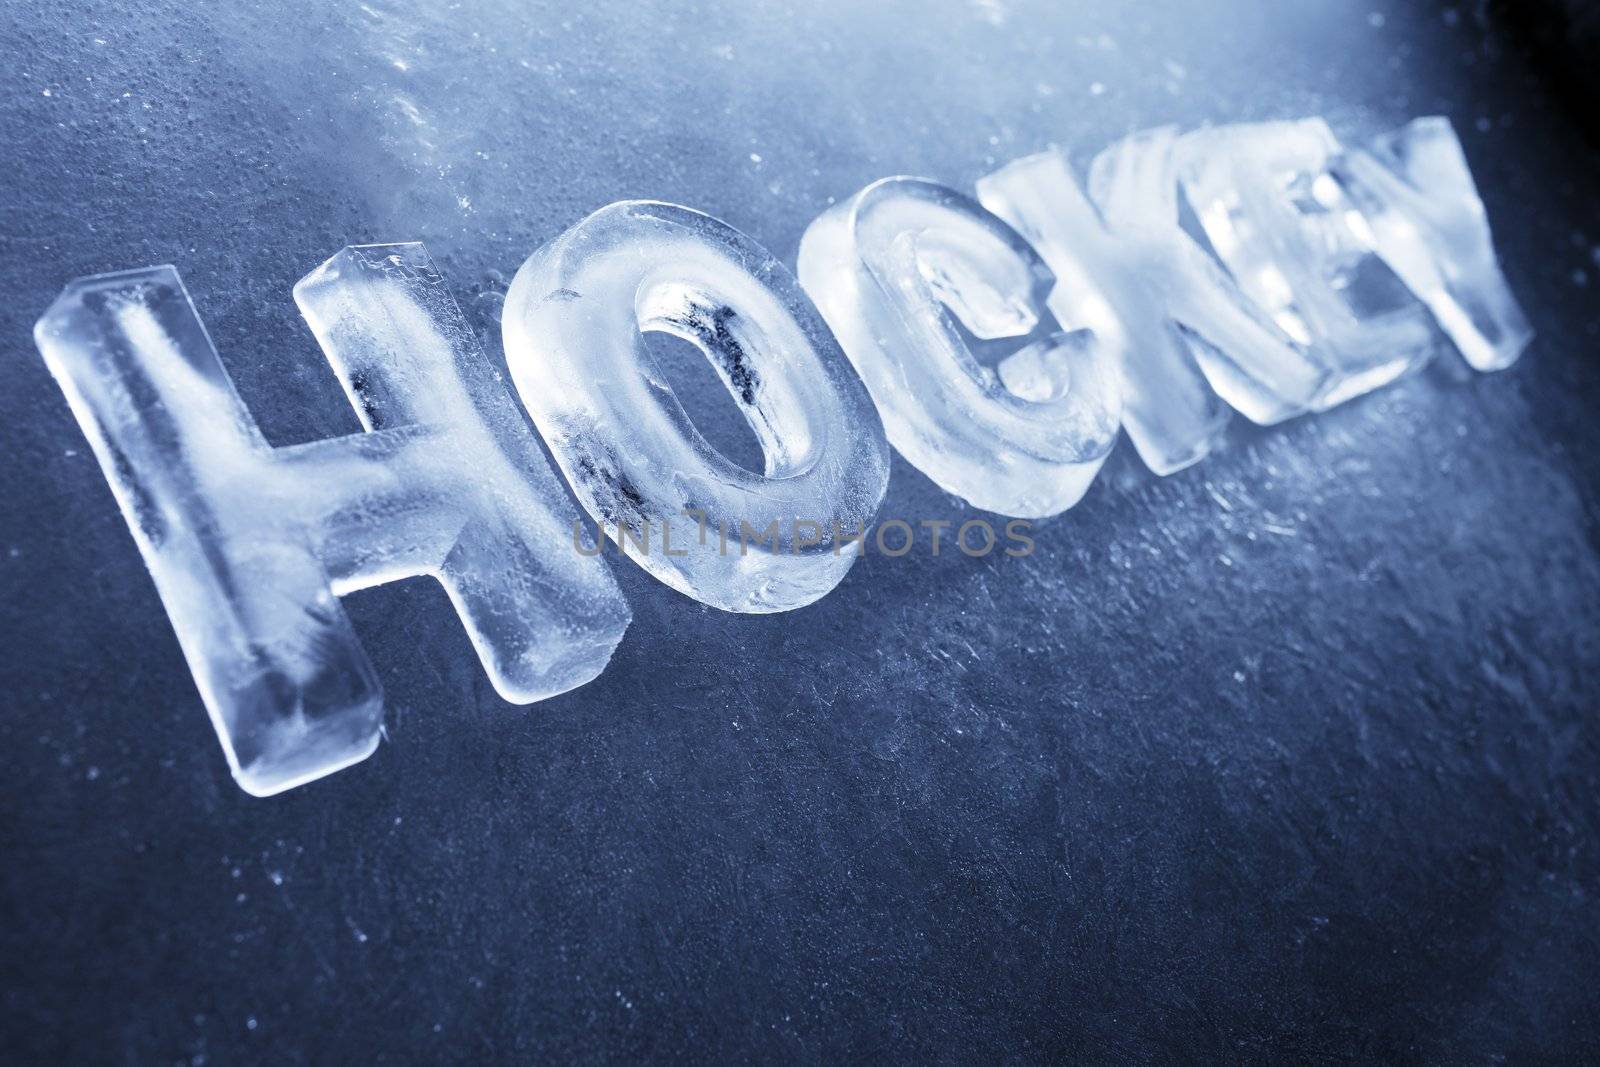 Word "Hockey" made of real ice letters on ice background.